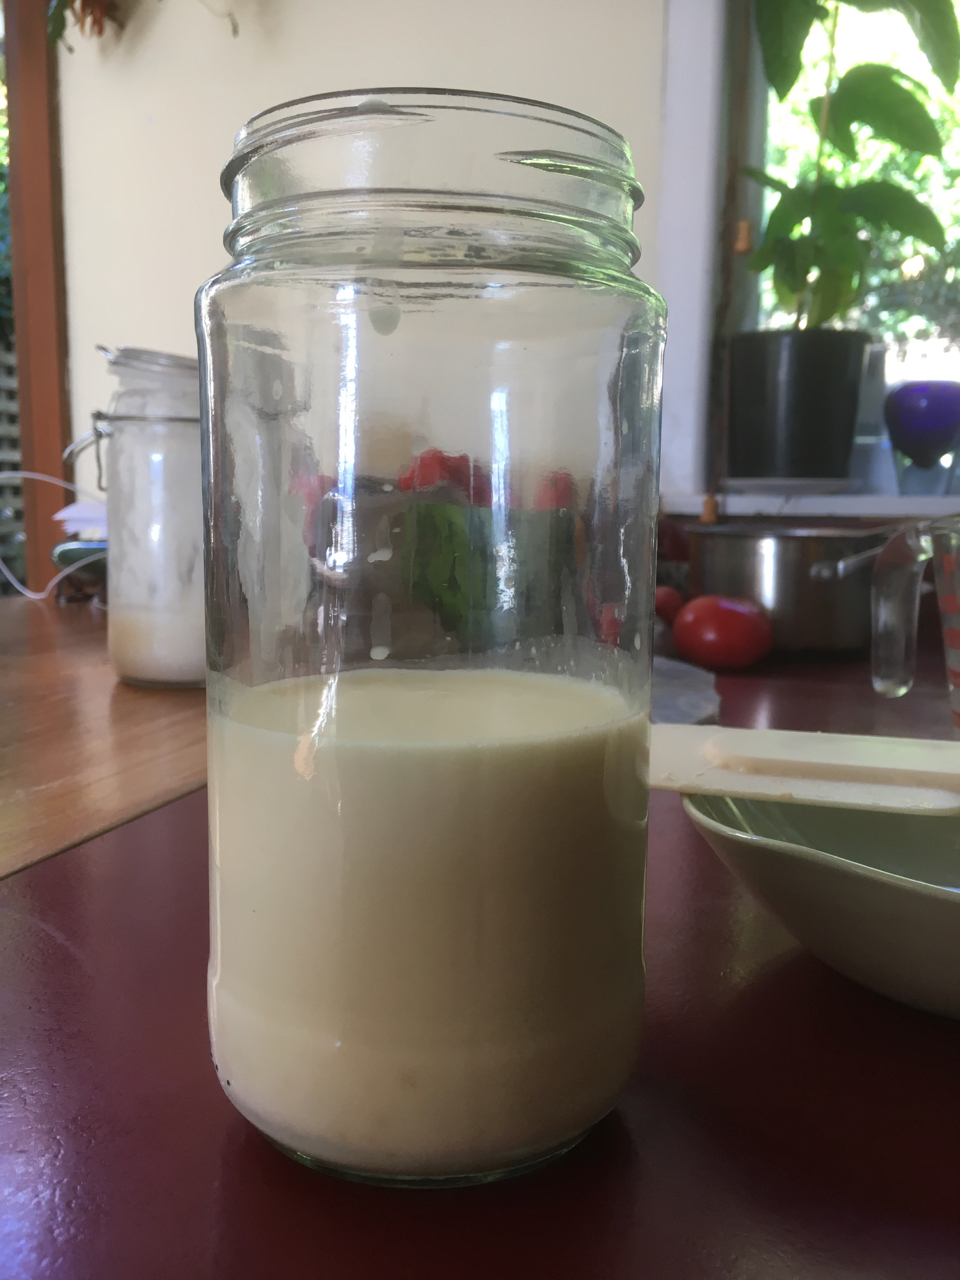 Closeup view of clean glass jar that is half full of milk. The jar contains kefir granules but are submerged in the milk and they cannot be seen. The jar is sitting on a kitchen bench that has a variety of fruit, utensils and potted plants in the background.